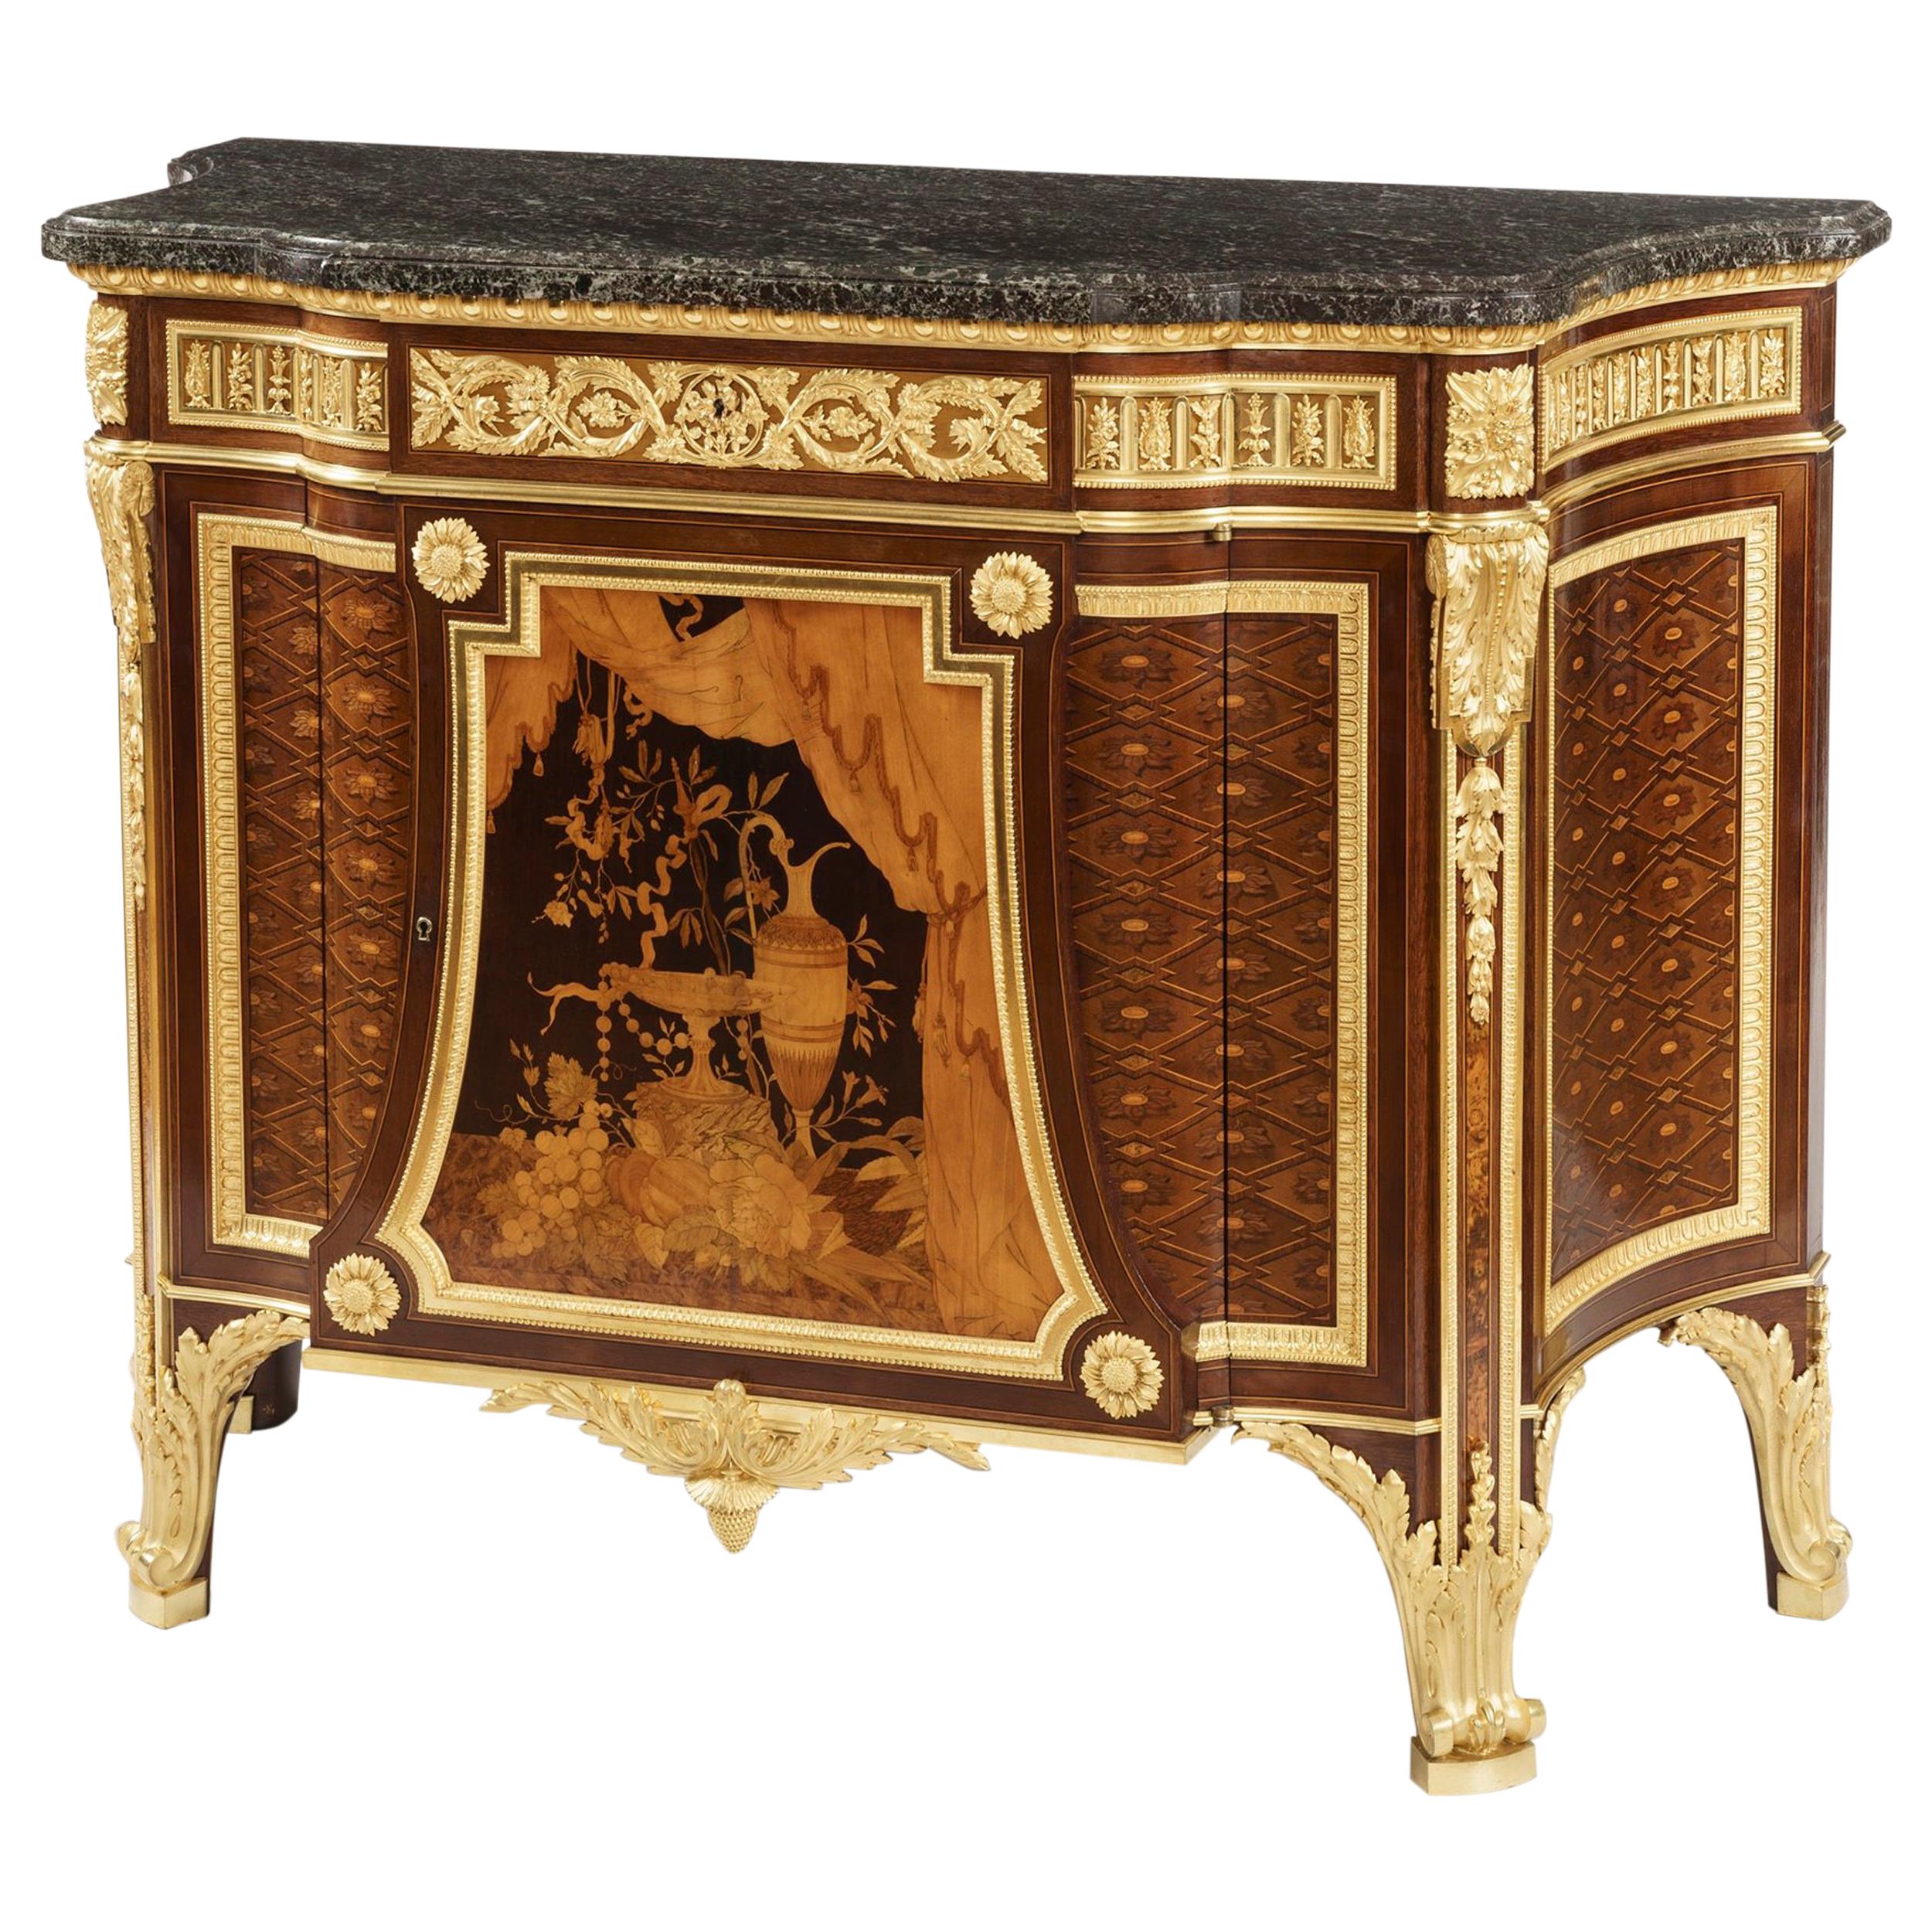 Louis XVI Style Commode by Charles Guillaume Winckelsen